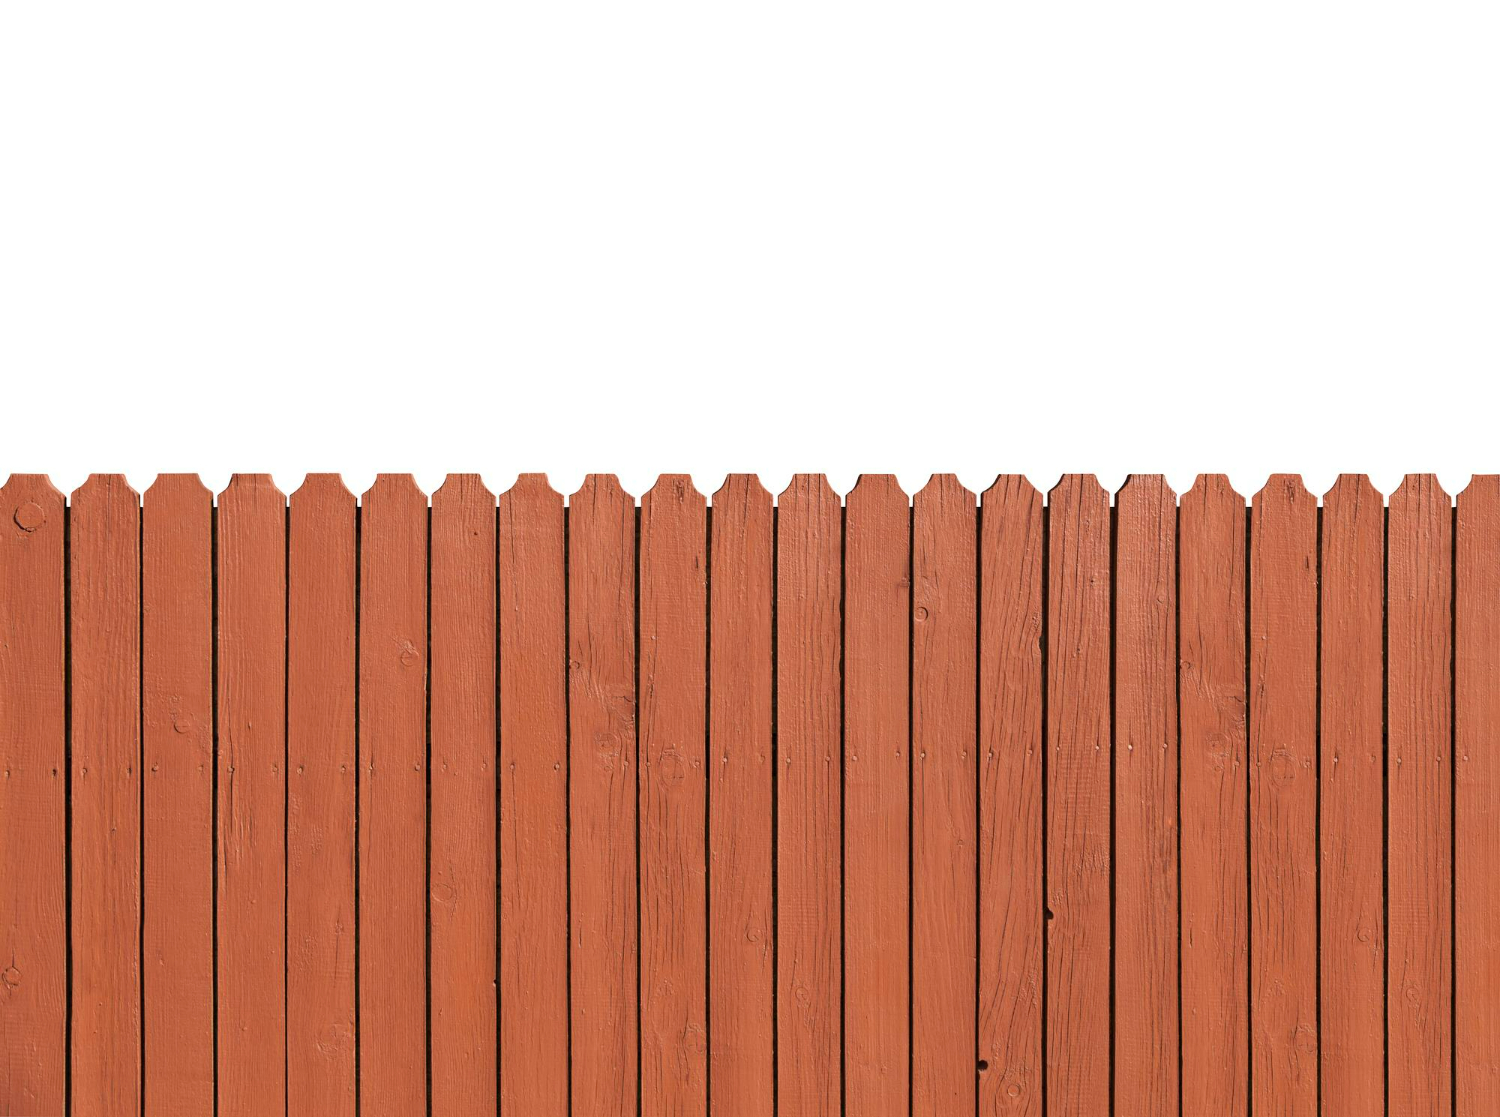 Wood Fence Services That Will Last Through Years